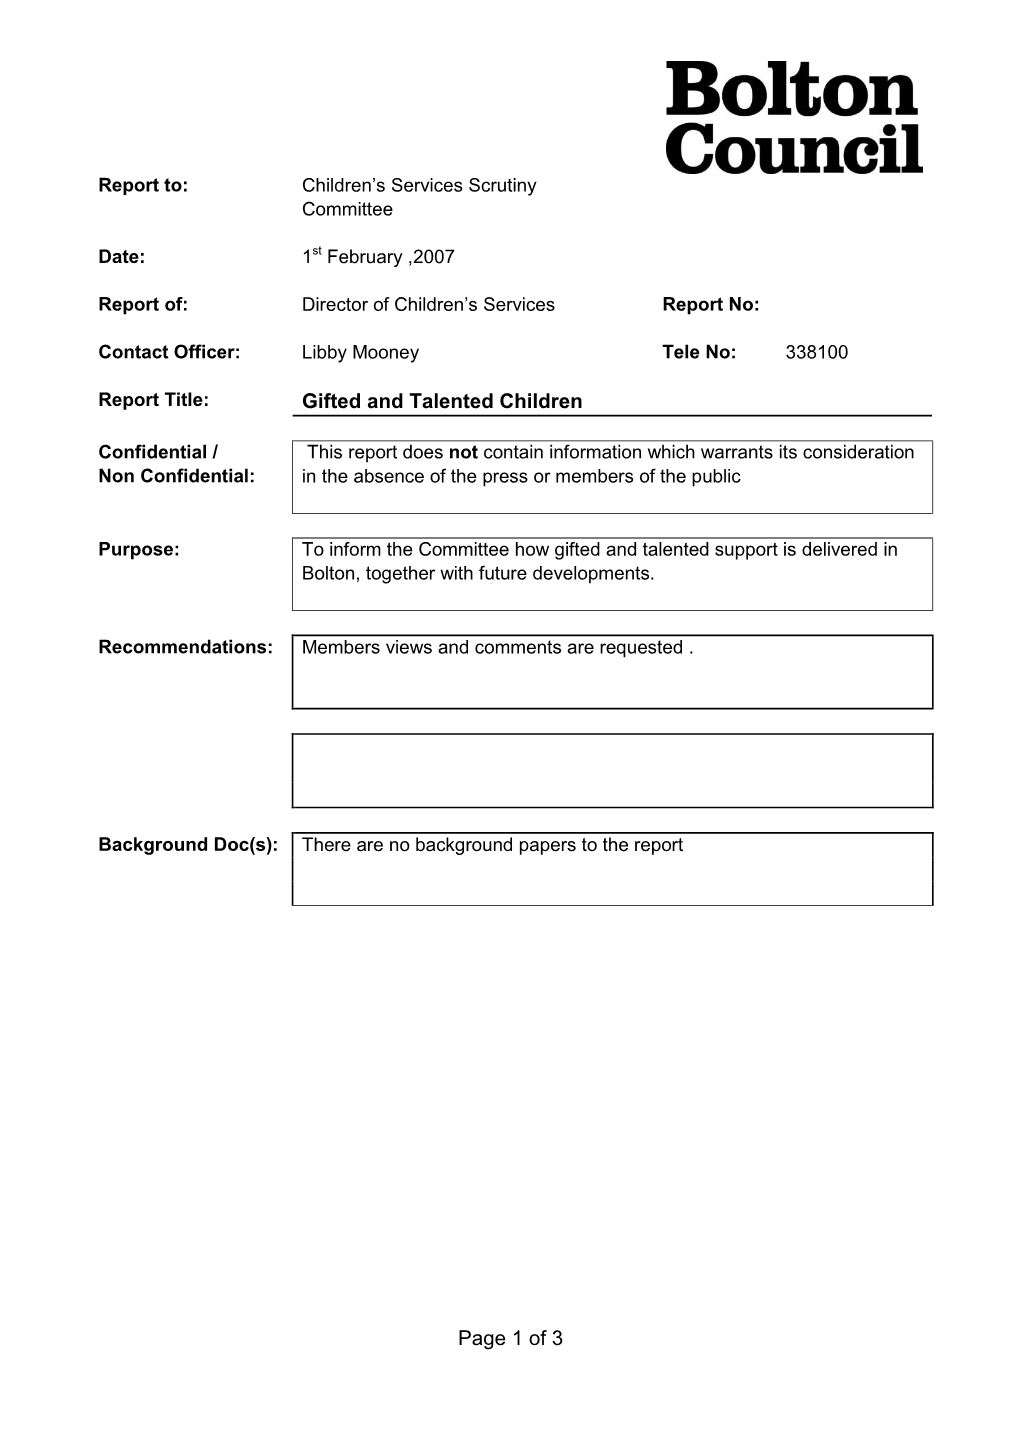 Gifted and Talented Children Page 1 of 3